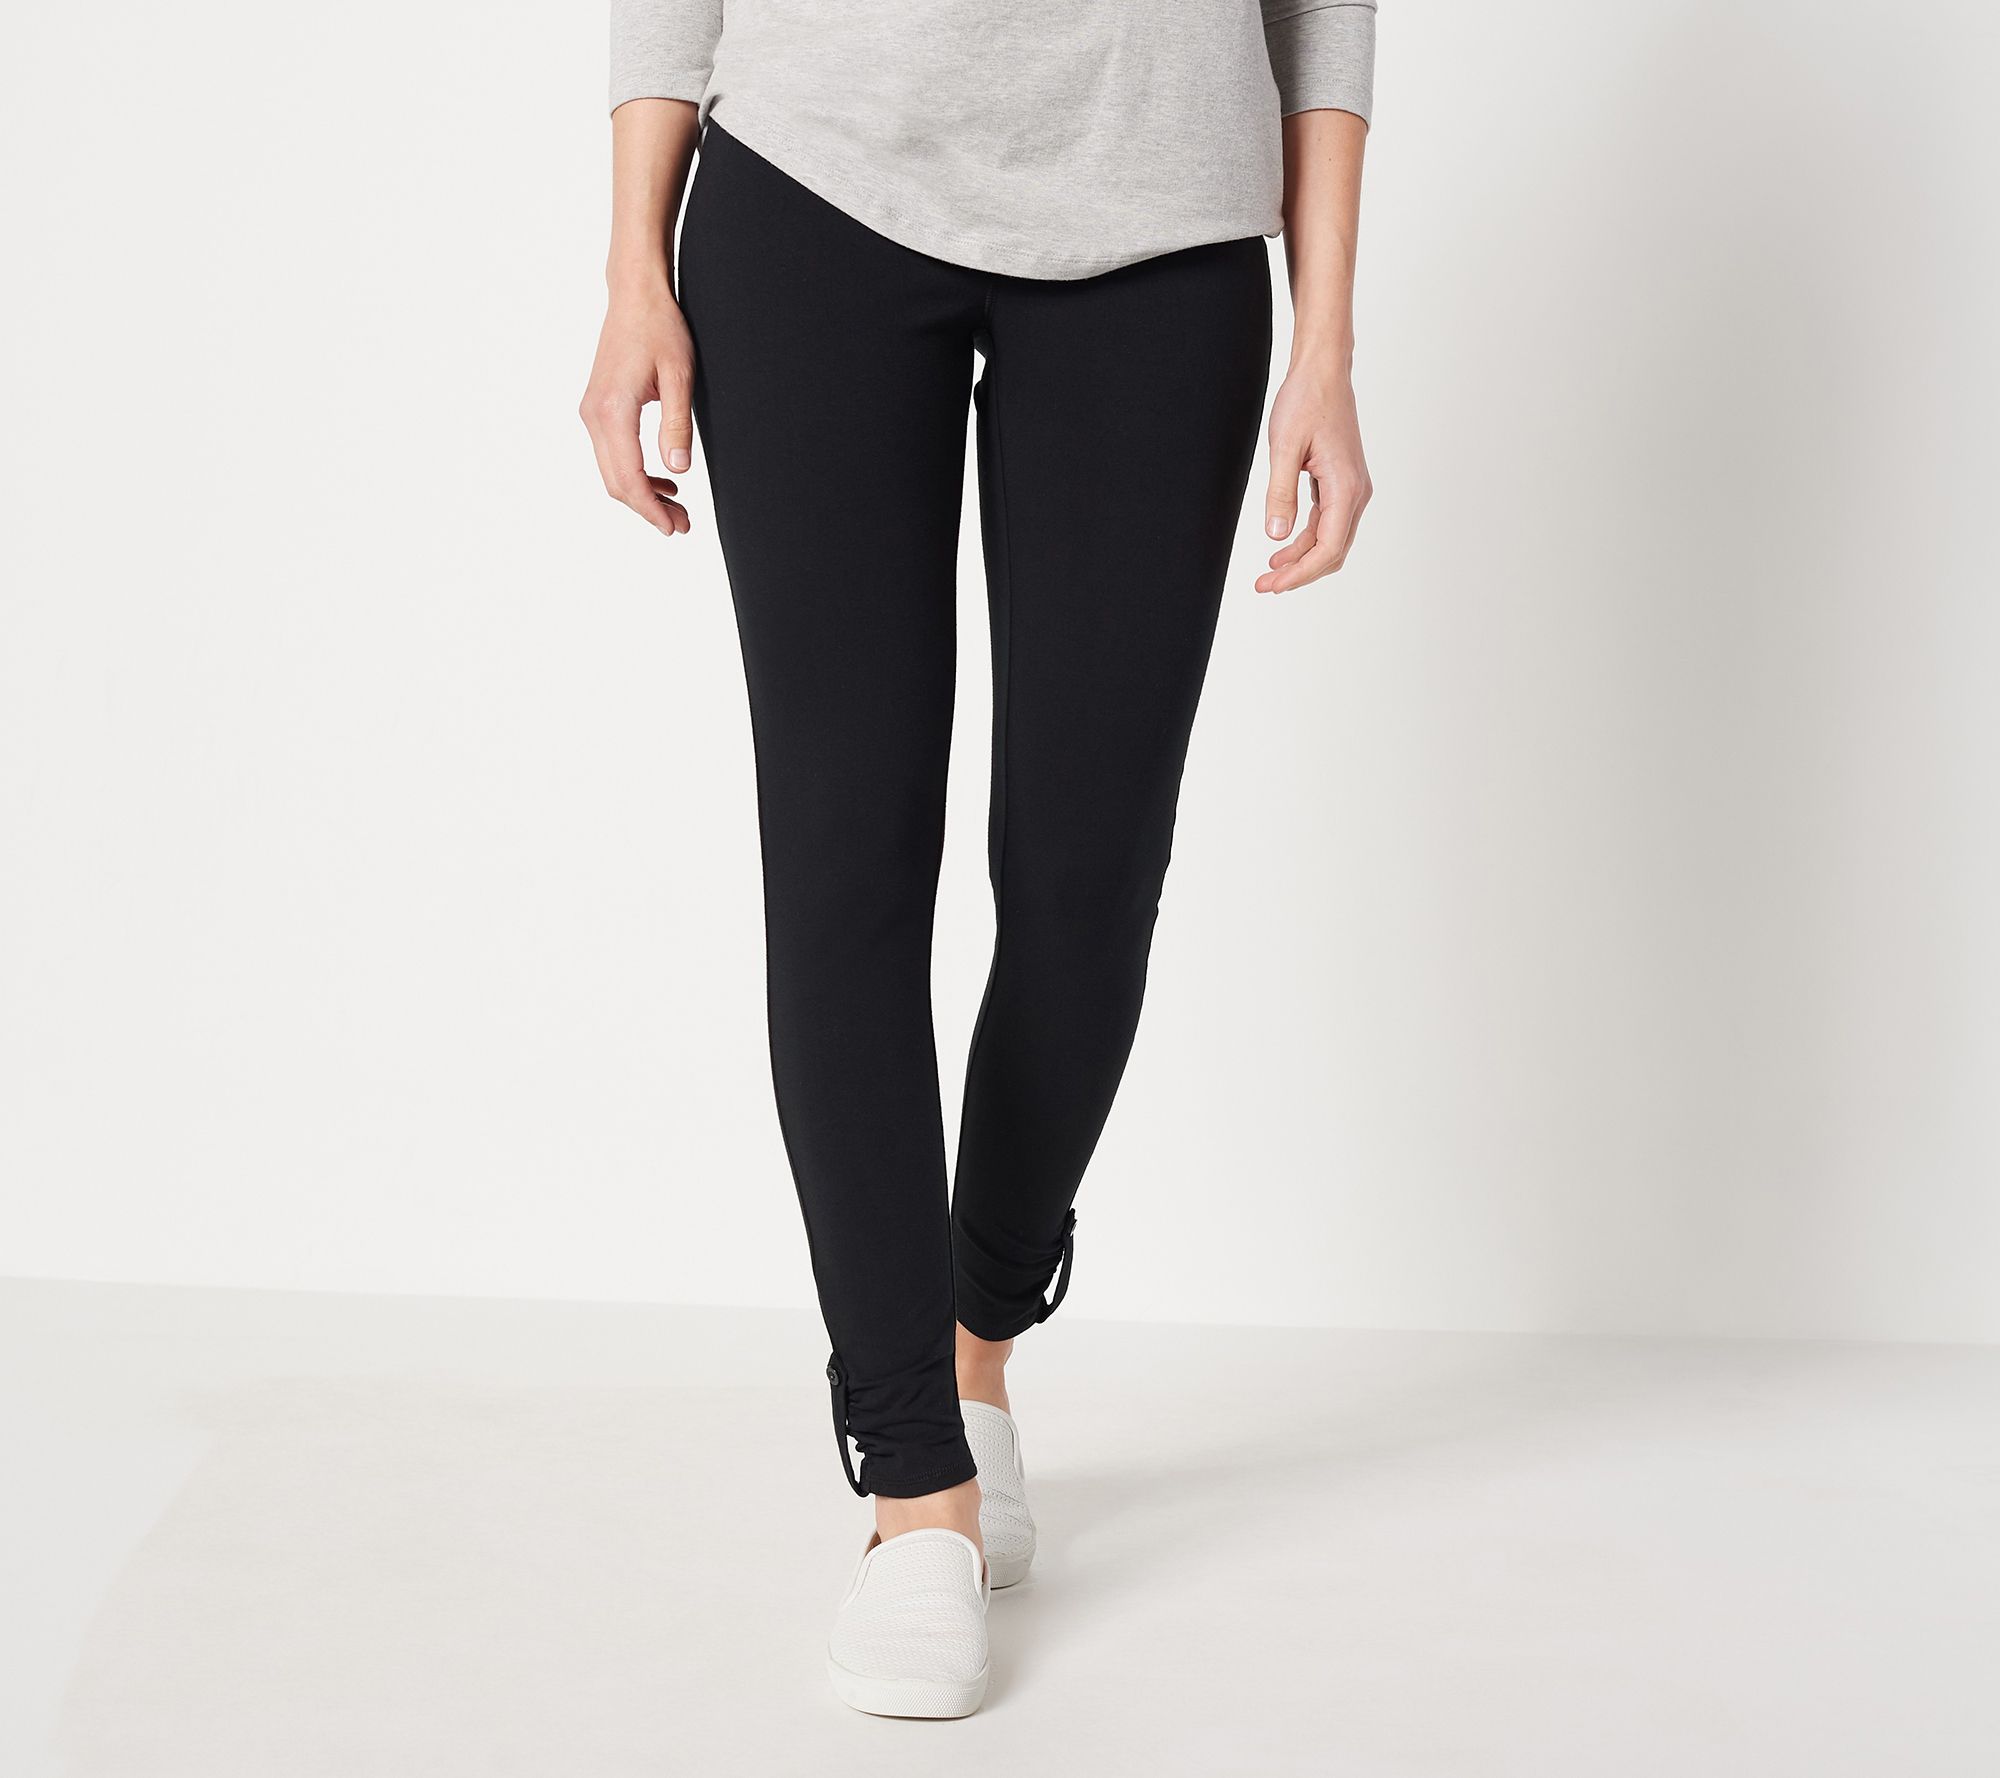 Denim & Co. Active Petite Duo Stretch Pull-On Legging with Ankle Dtl 